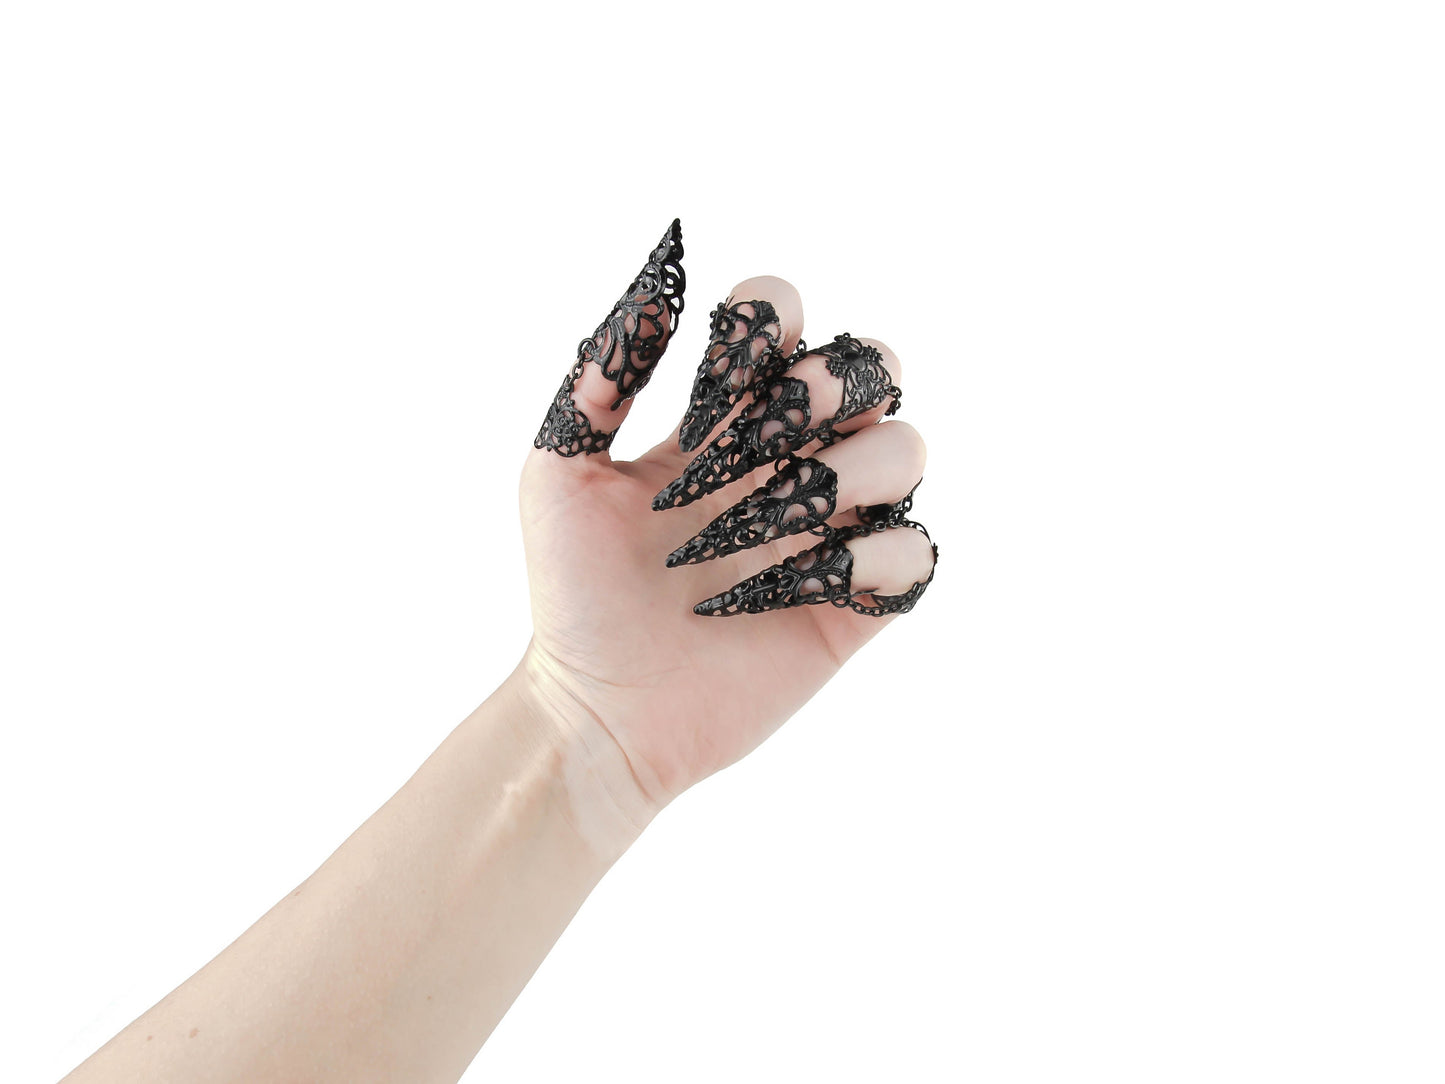 A hand is elegantly adorned with a full set of Myril Jewels claw rings, each finger crowned with an intricate, black lace-like filigree design that evokes the neo-goth spirit. This dark-avantgarde accessory is a perfect embodiment of gothic-chic, ideal for adding a dramatic flair to Halloween attire or as a standout addition to any minimal goth, whimsigoth, or witchcore ensemble. These claw rings are not only a bold statement for rave parties and festivals but also add an edge to everyday wear.